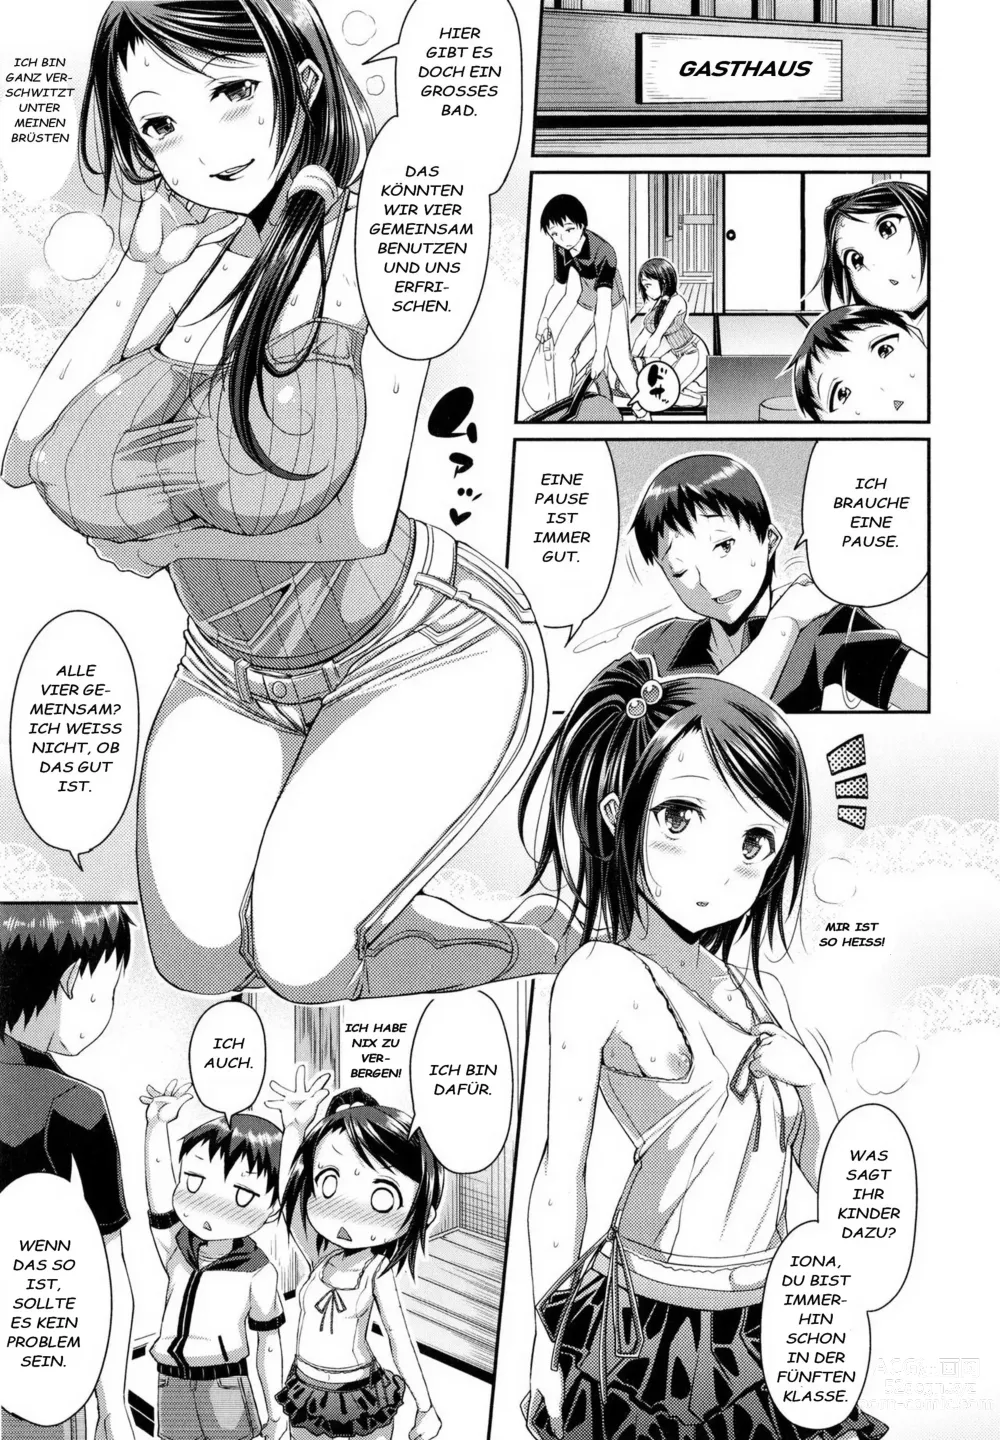 Page 3 of manga Step Child Swapping (decensored)